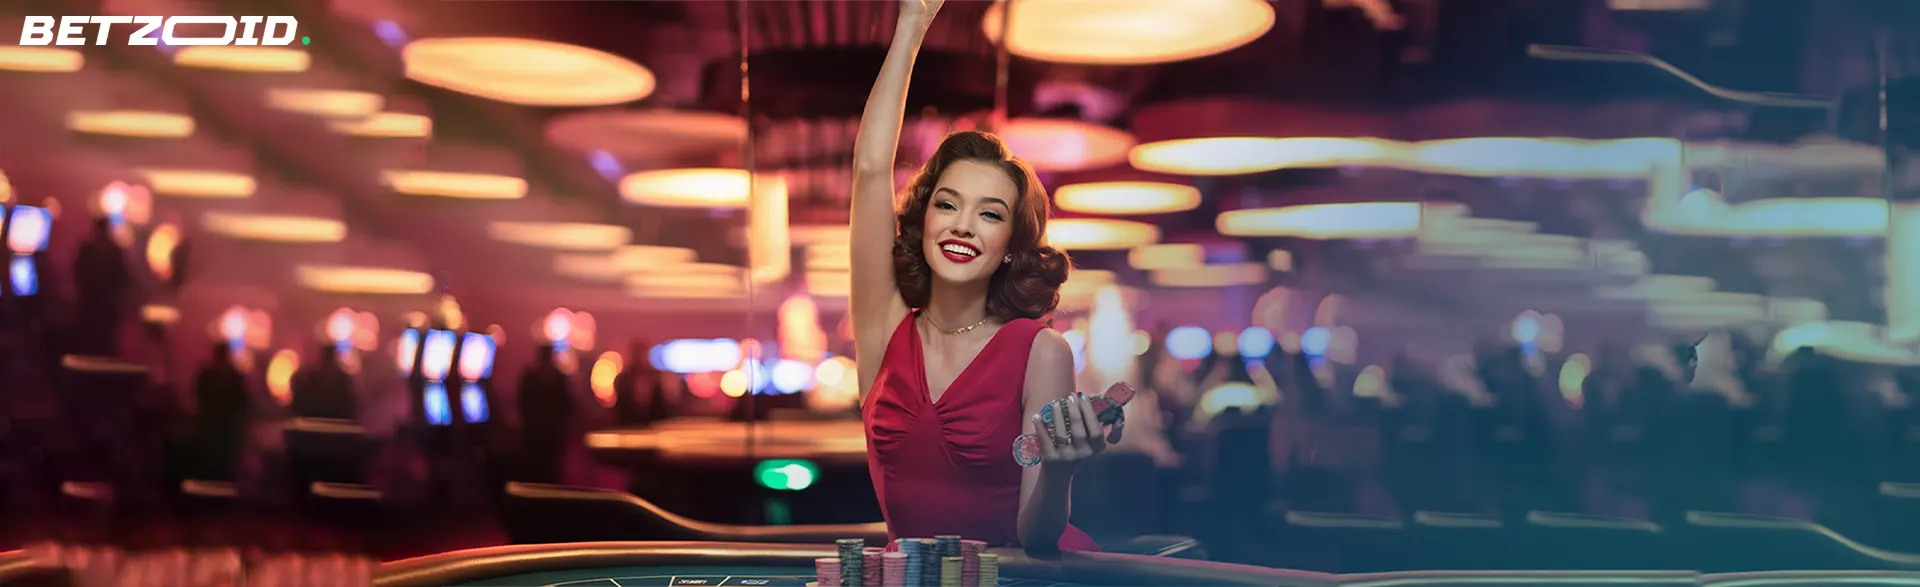 Woman celebrating a win at a casino table for free signup bonus no deposit real money casino in Ontario.